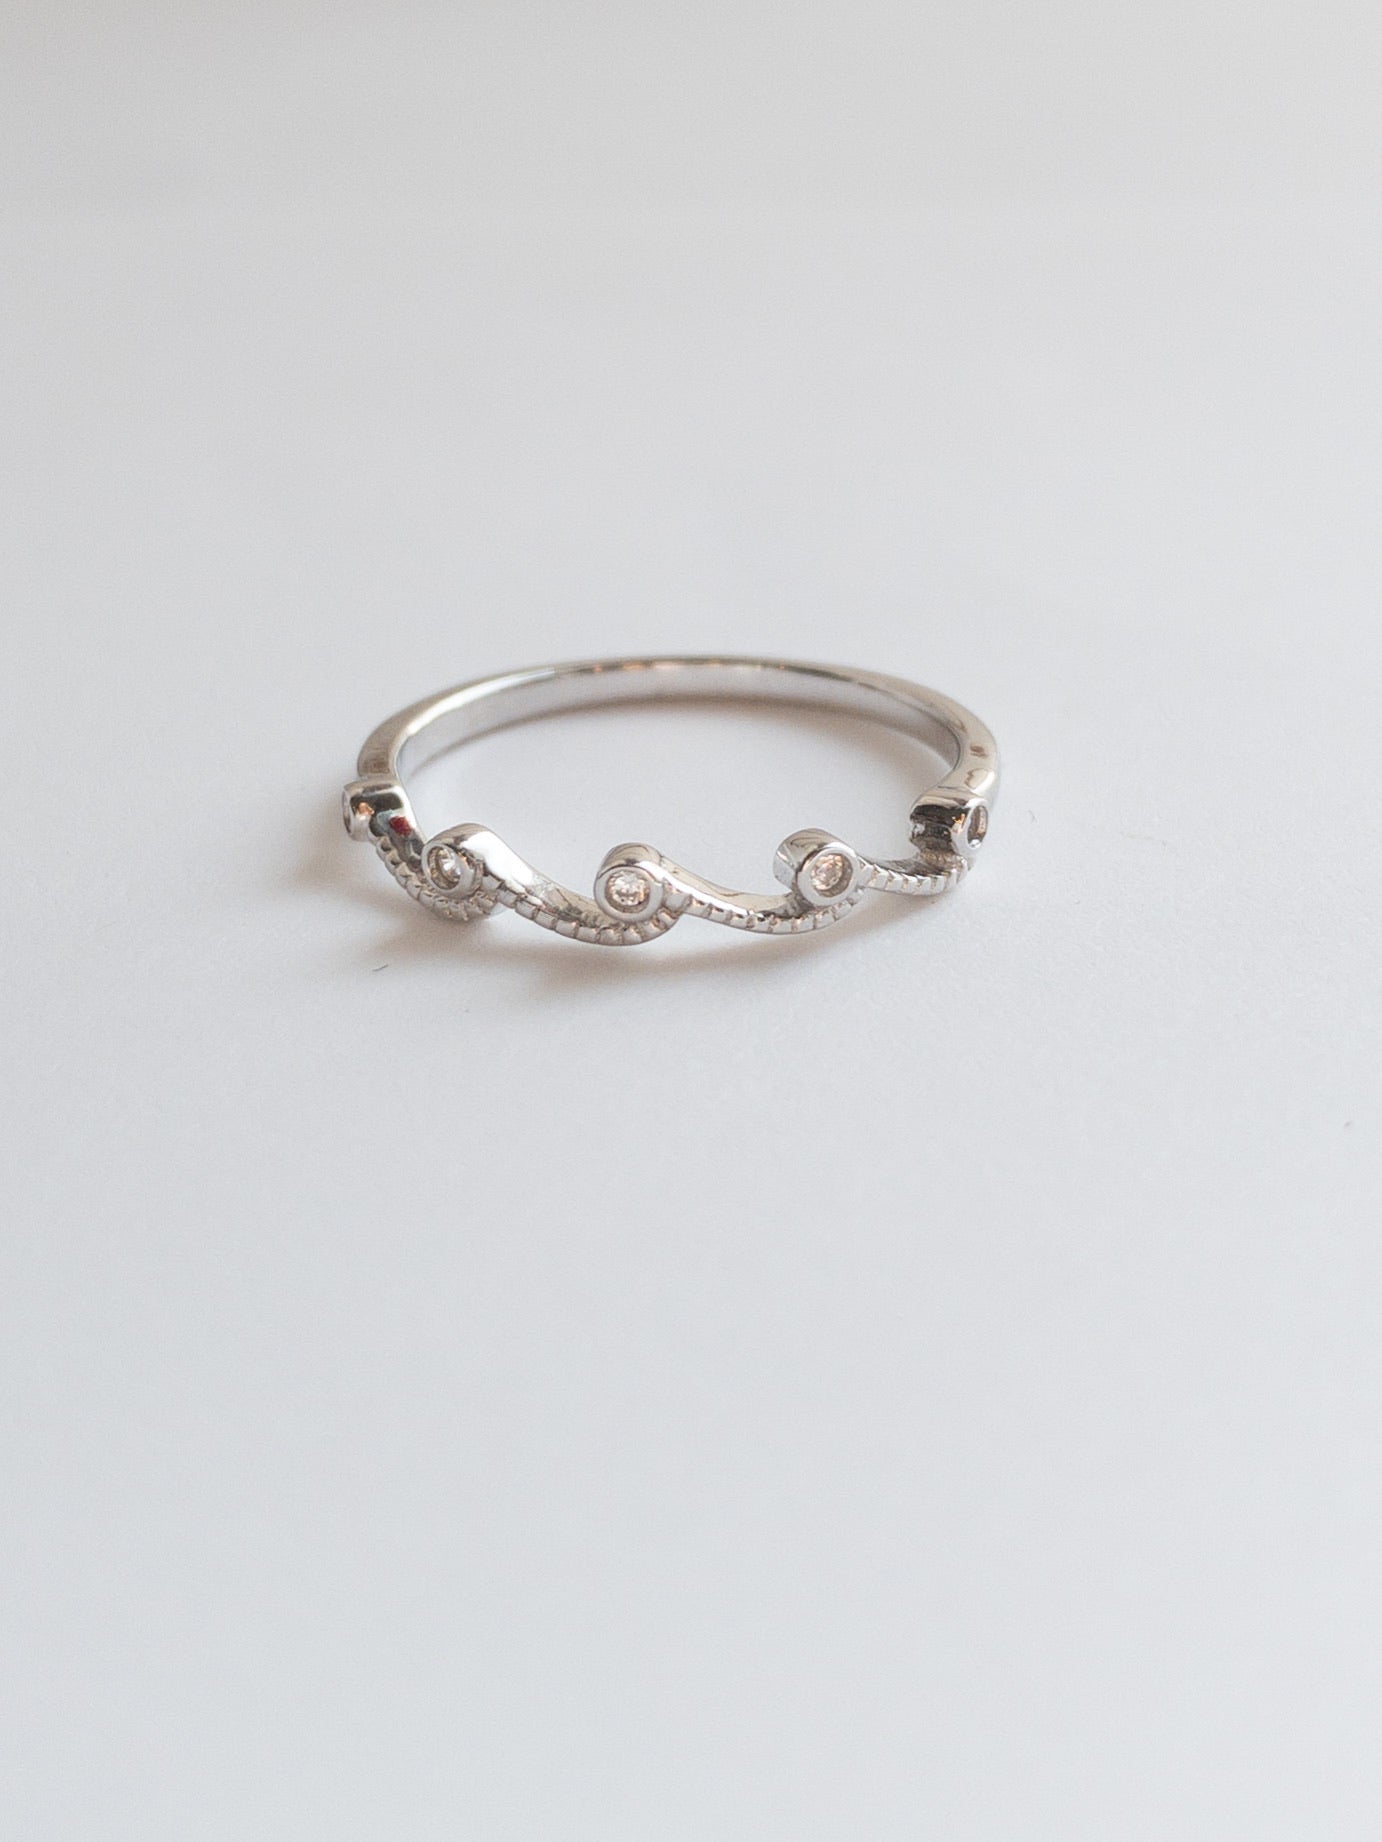 Tiny Sparkly waves rings- silver sterling silver 